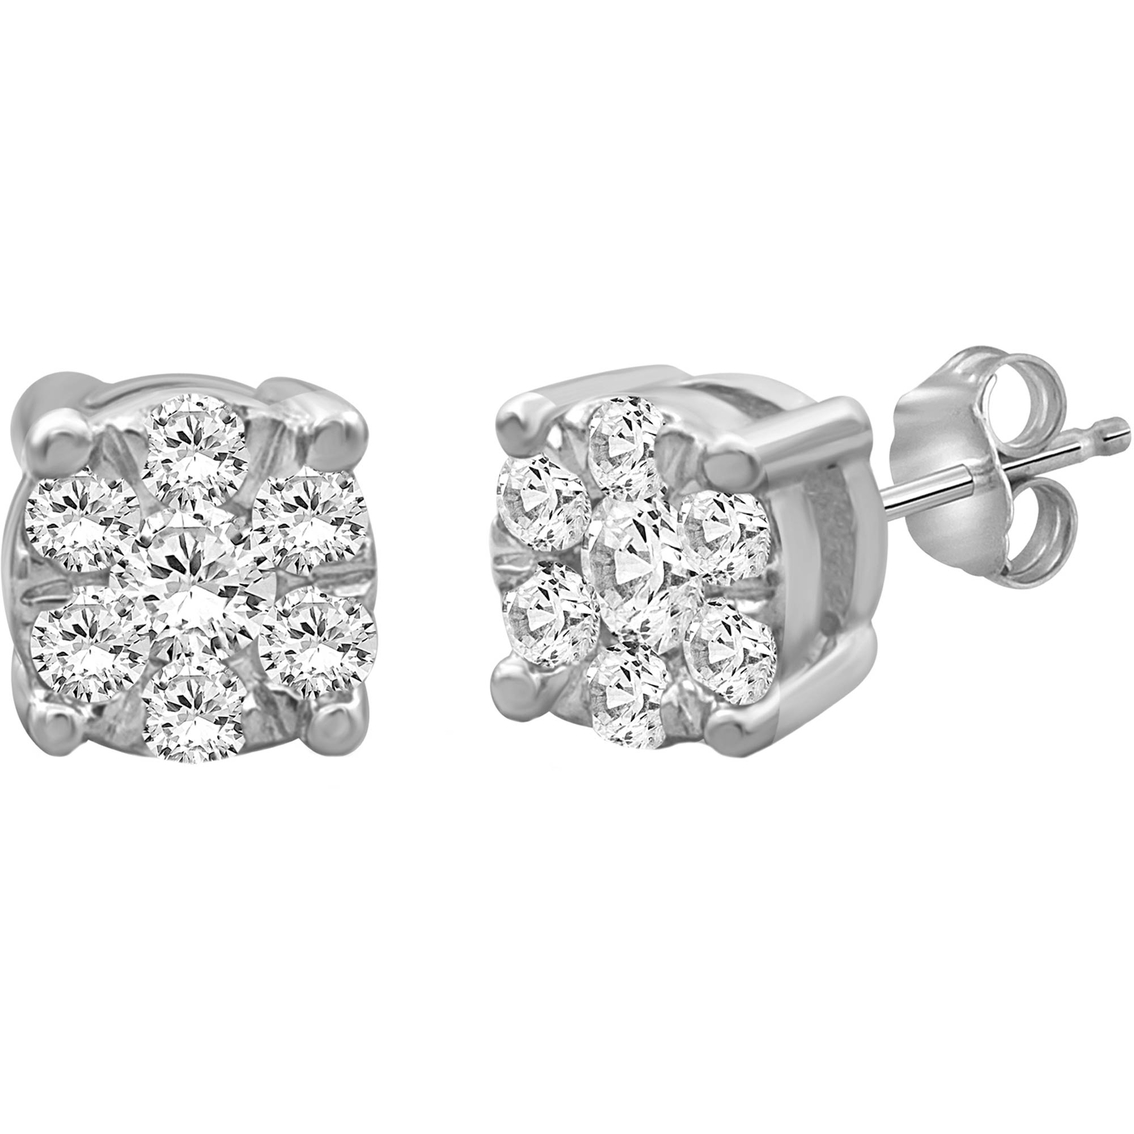 She Shines Sterling Silver 1/4 CTW Diamond Earring and Pendant Set - Image 5 of 7